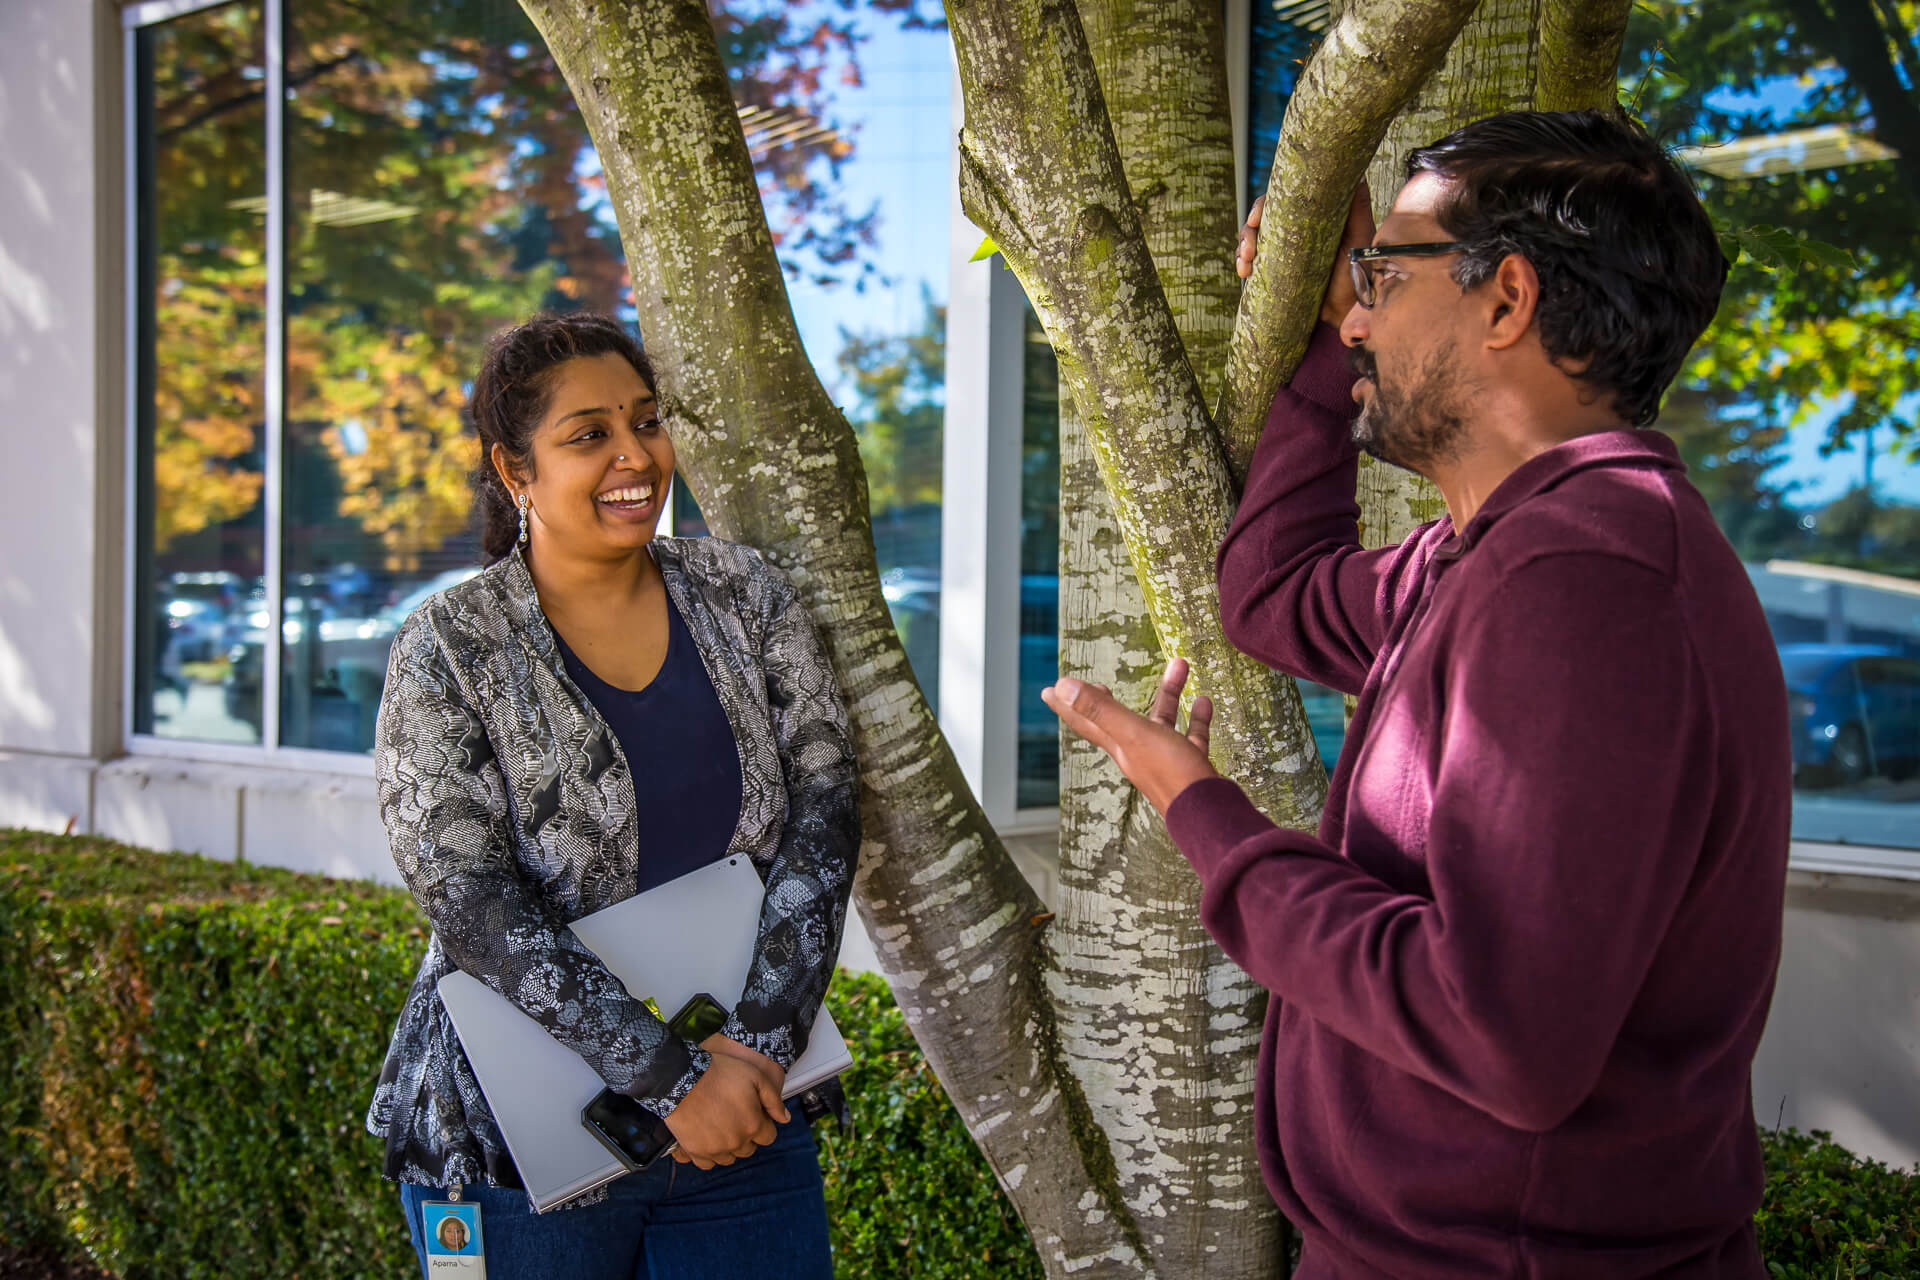 Aparna Chadalavada and Krishna Vemuri talk together outside of a building on the Microsoft campus.